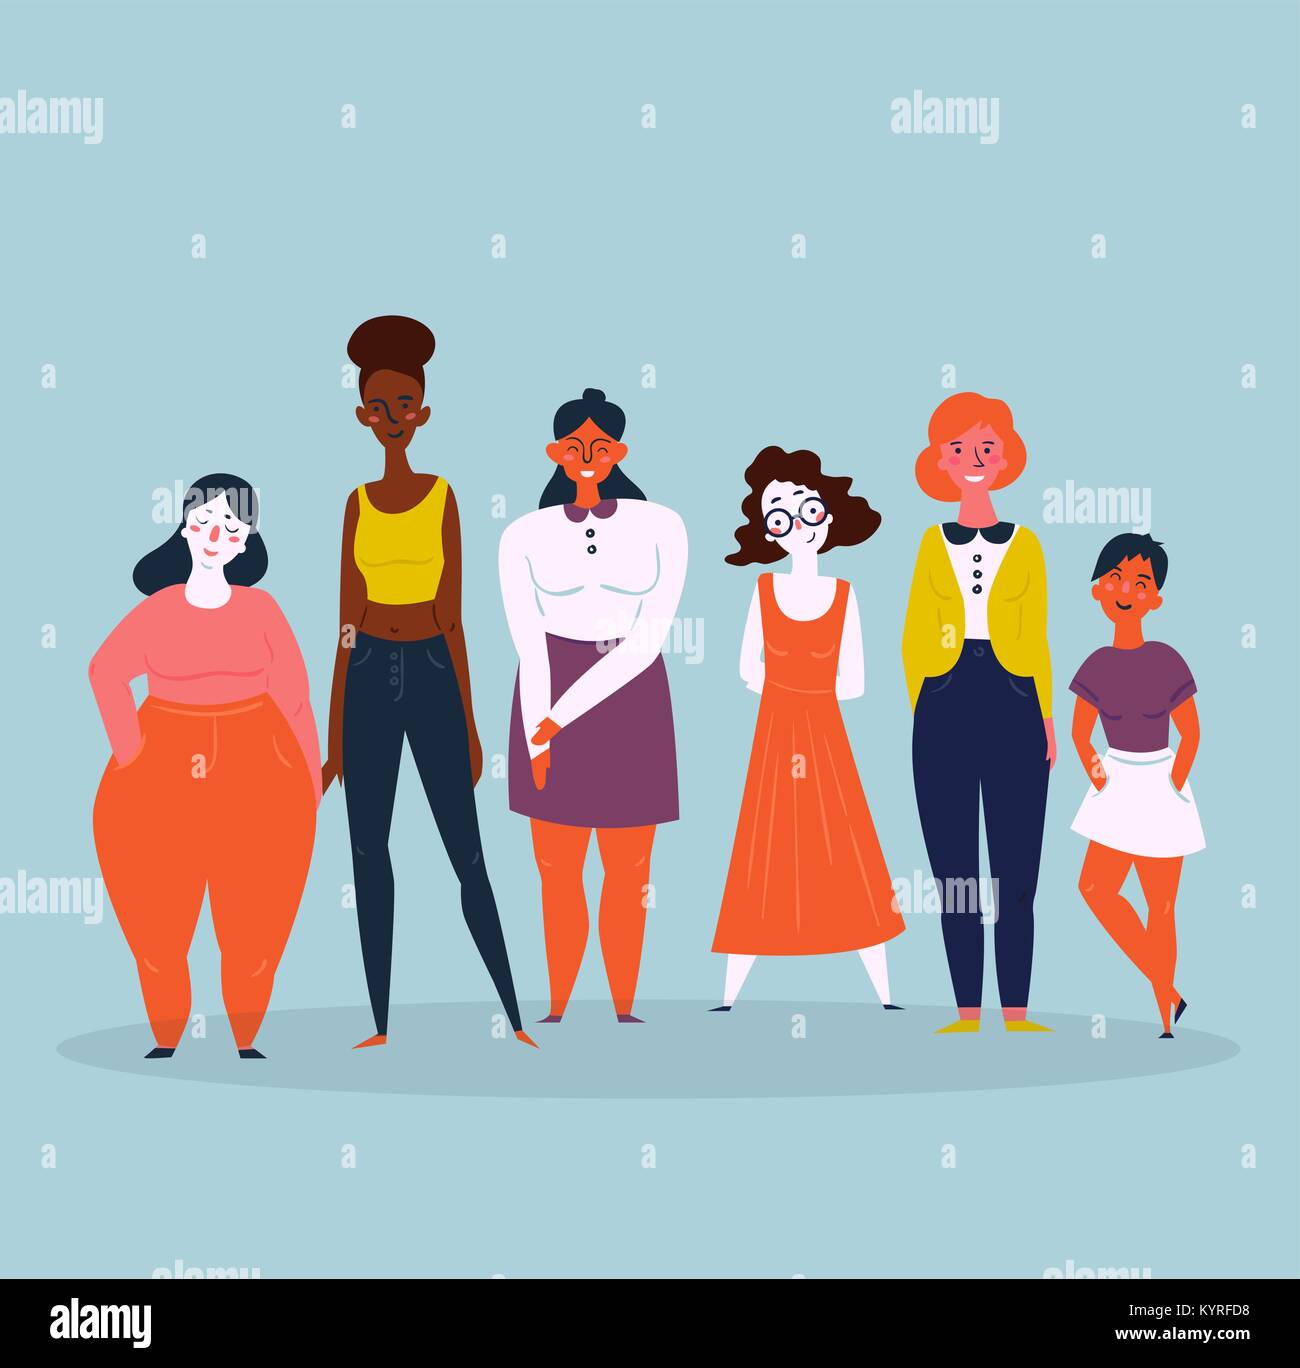 Illustration of a diverse group of women. Feminine Stock Vector